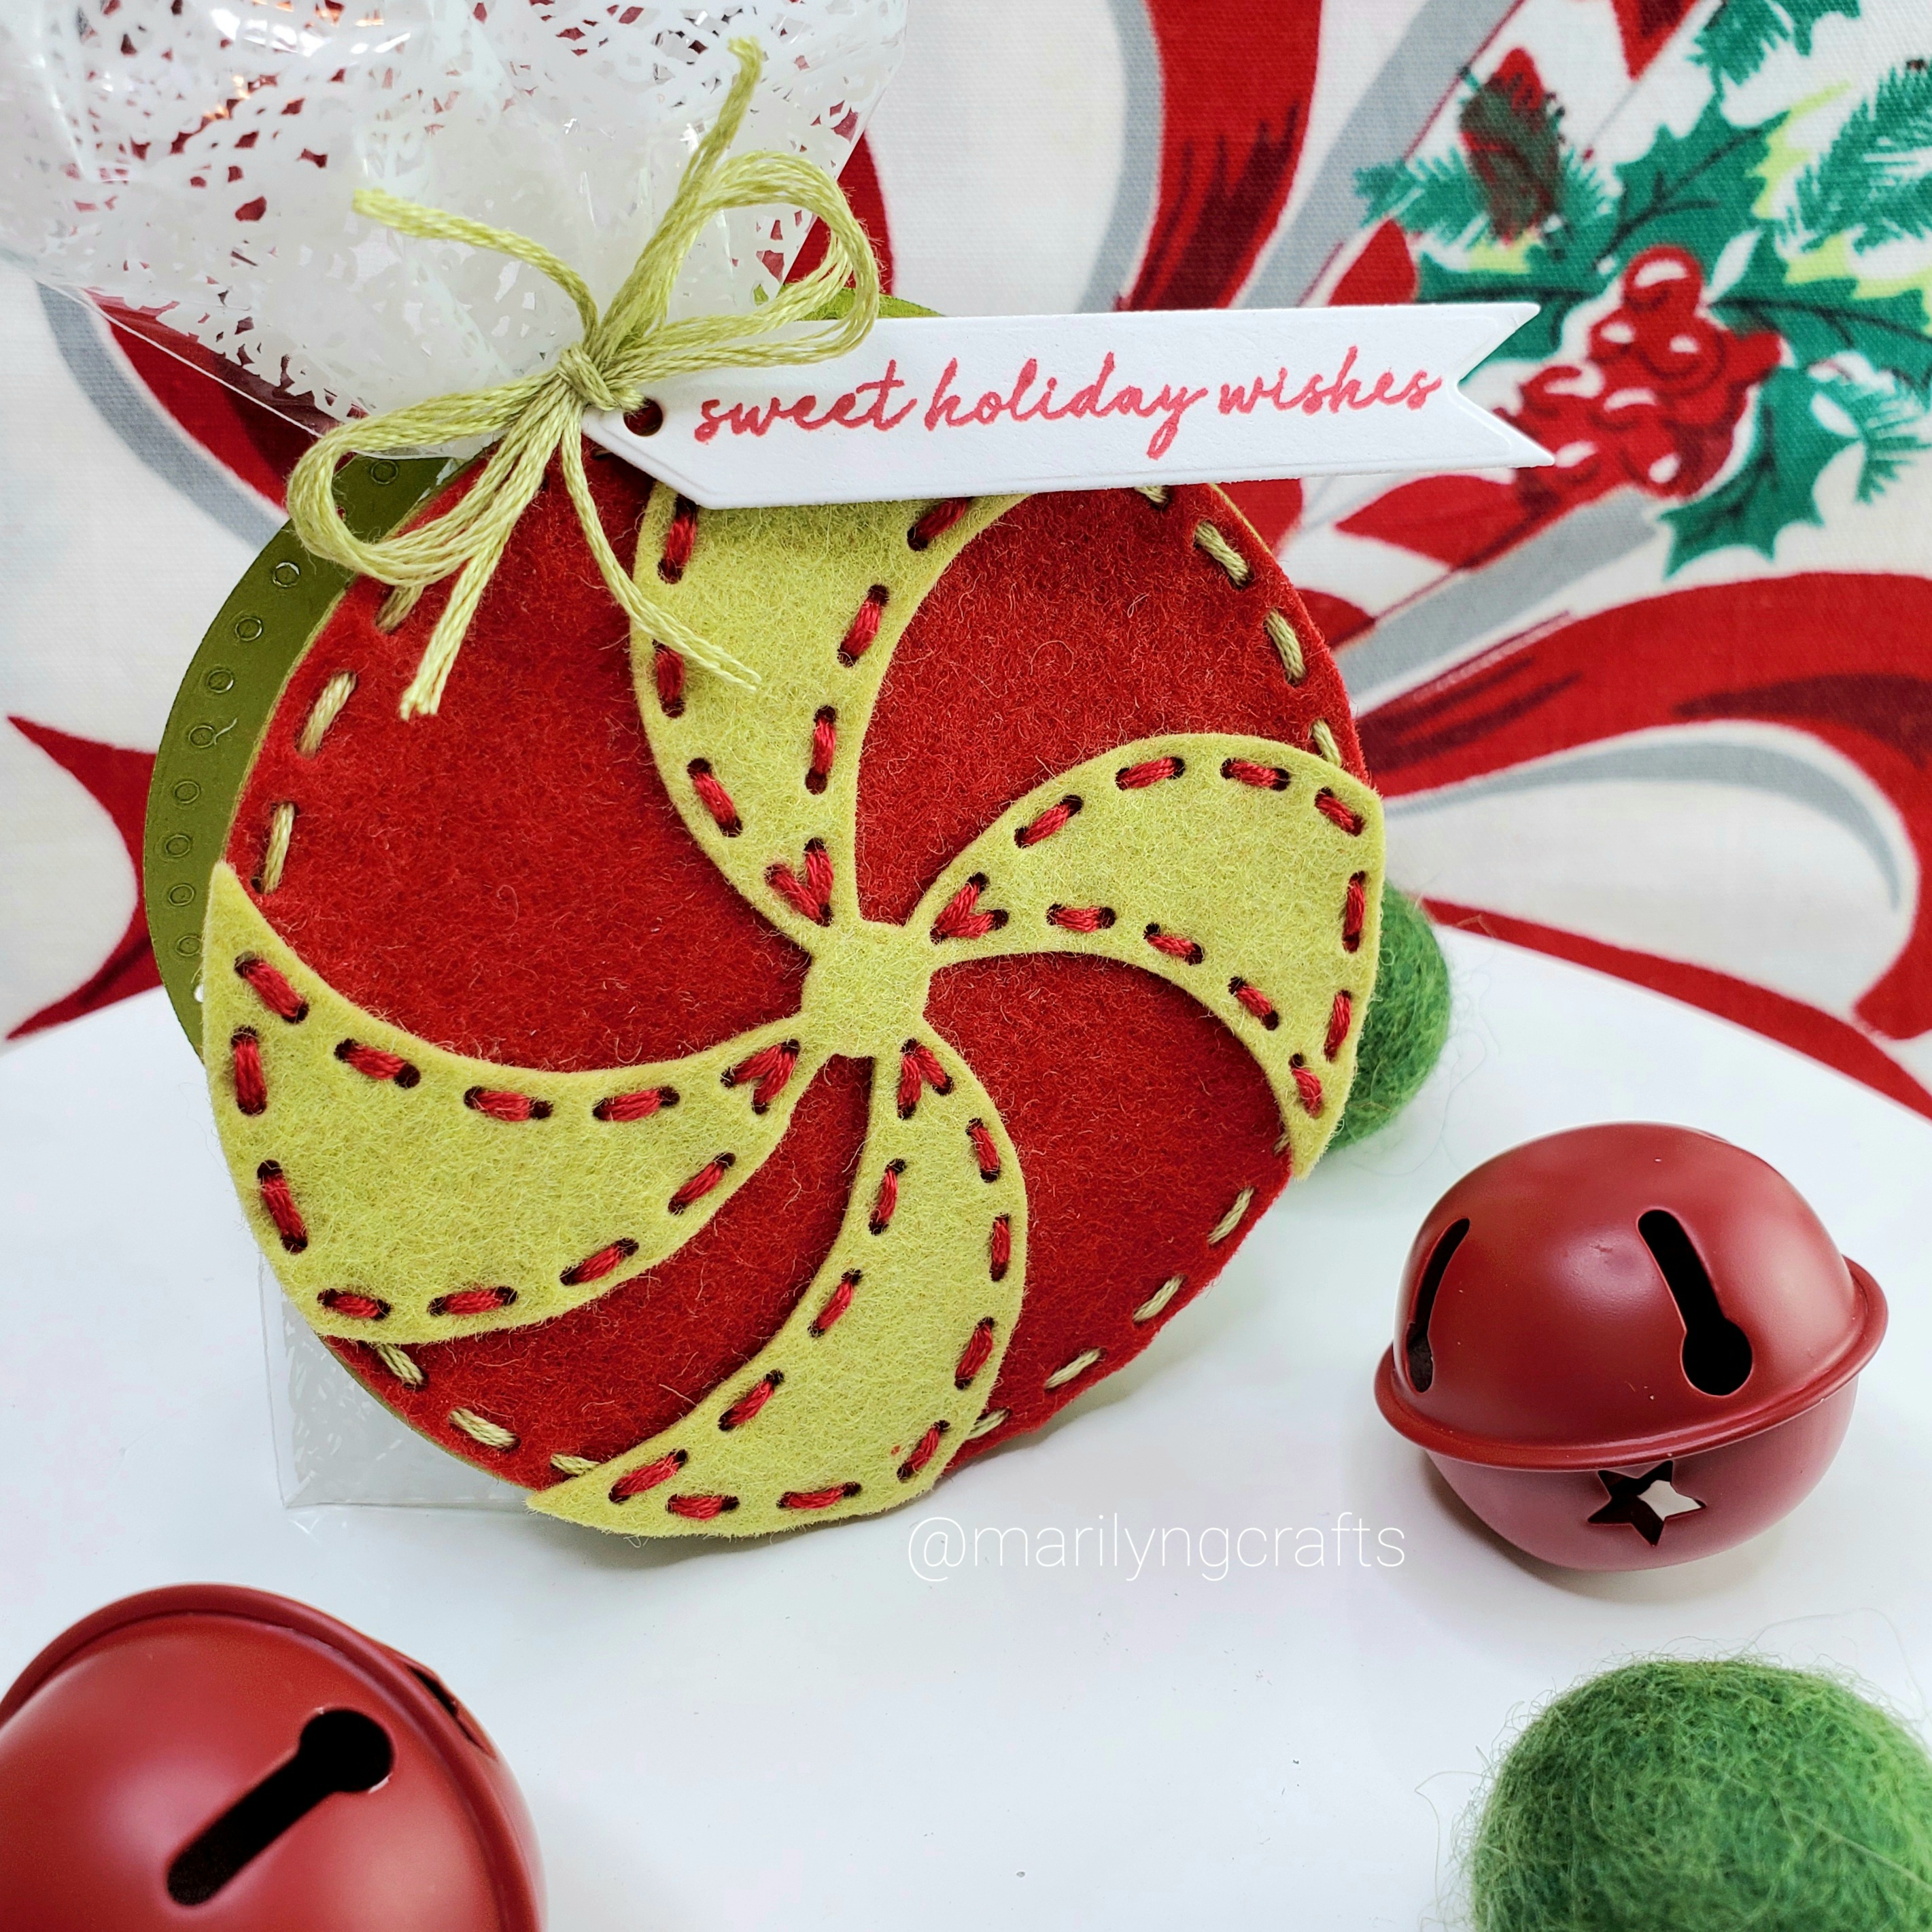 In Stitches: Candy Swirl Kit